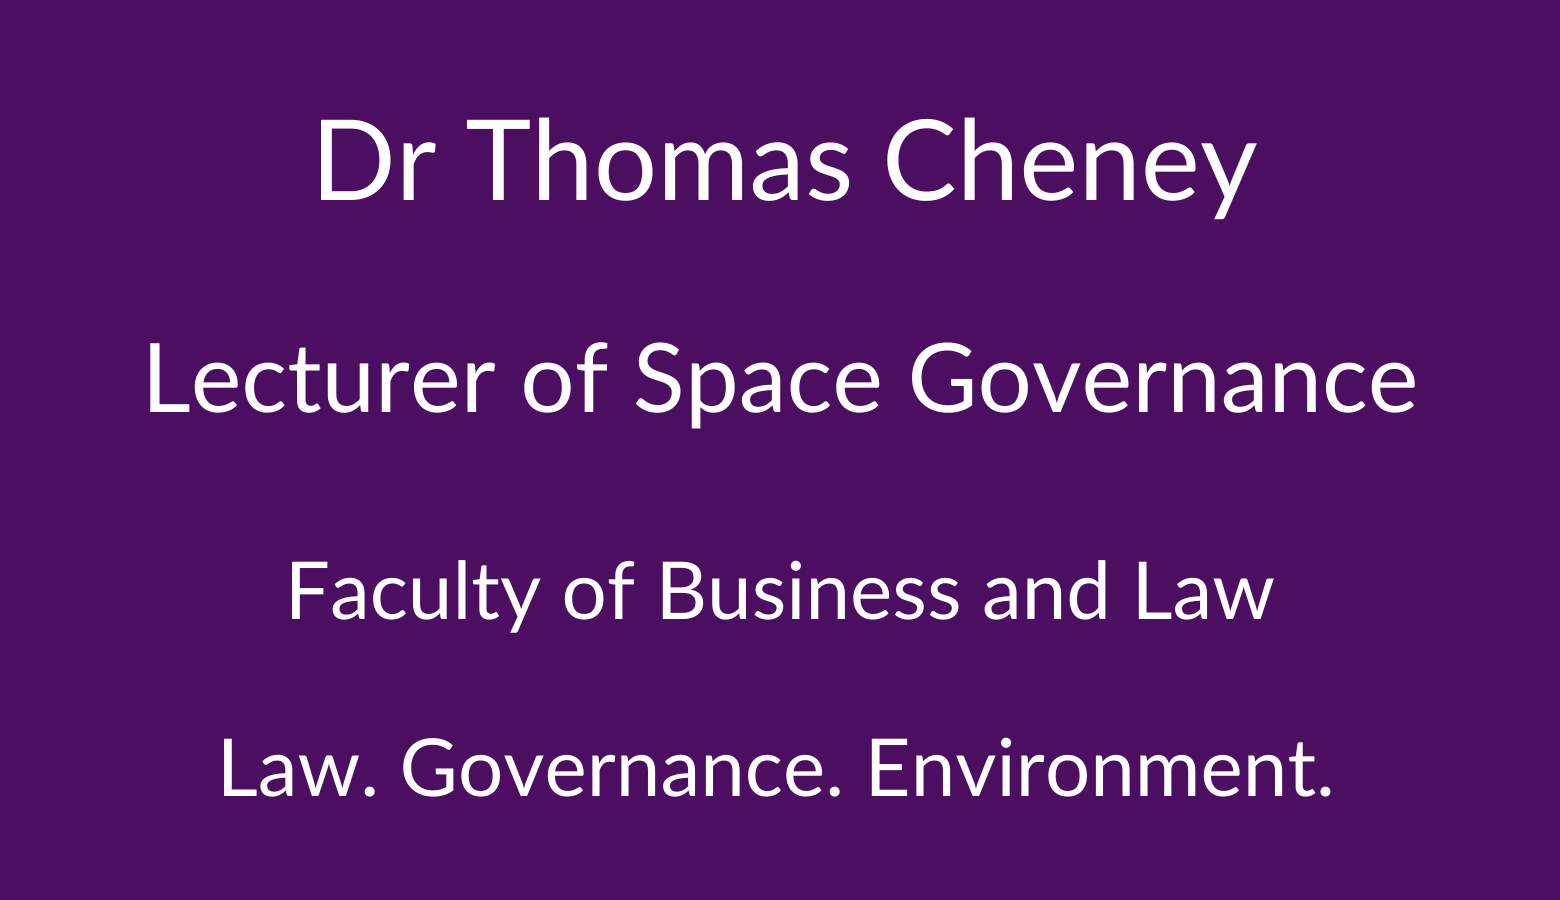 Dr Thomas Cheney. Lecturer of Space Governance. Faculty of Business and Law. Law. Governance. Environment.